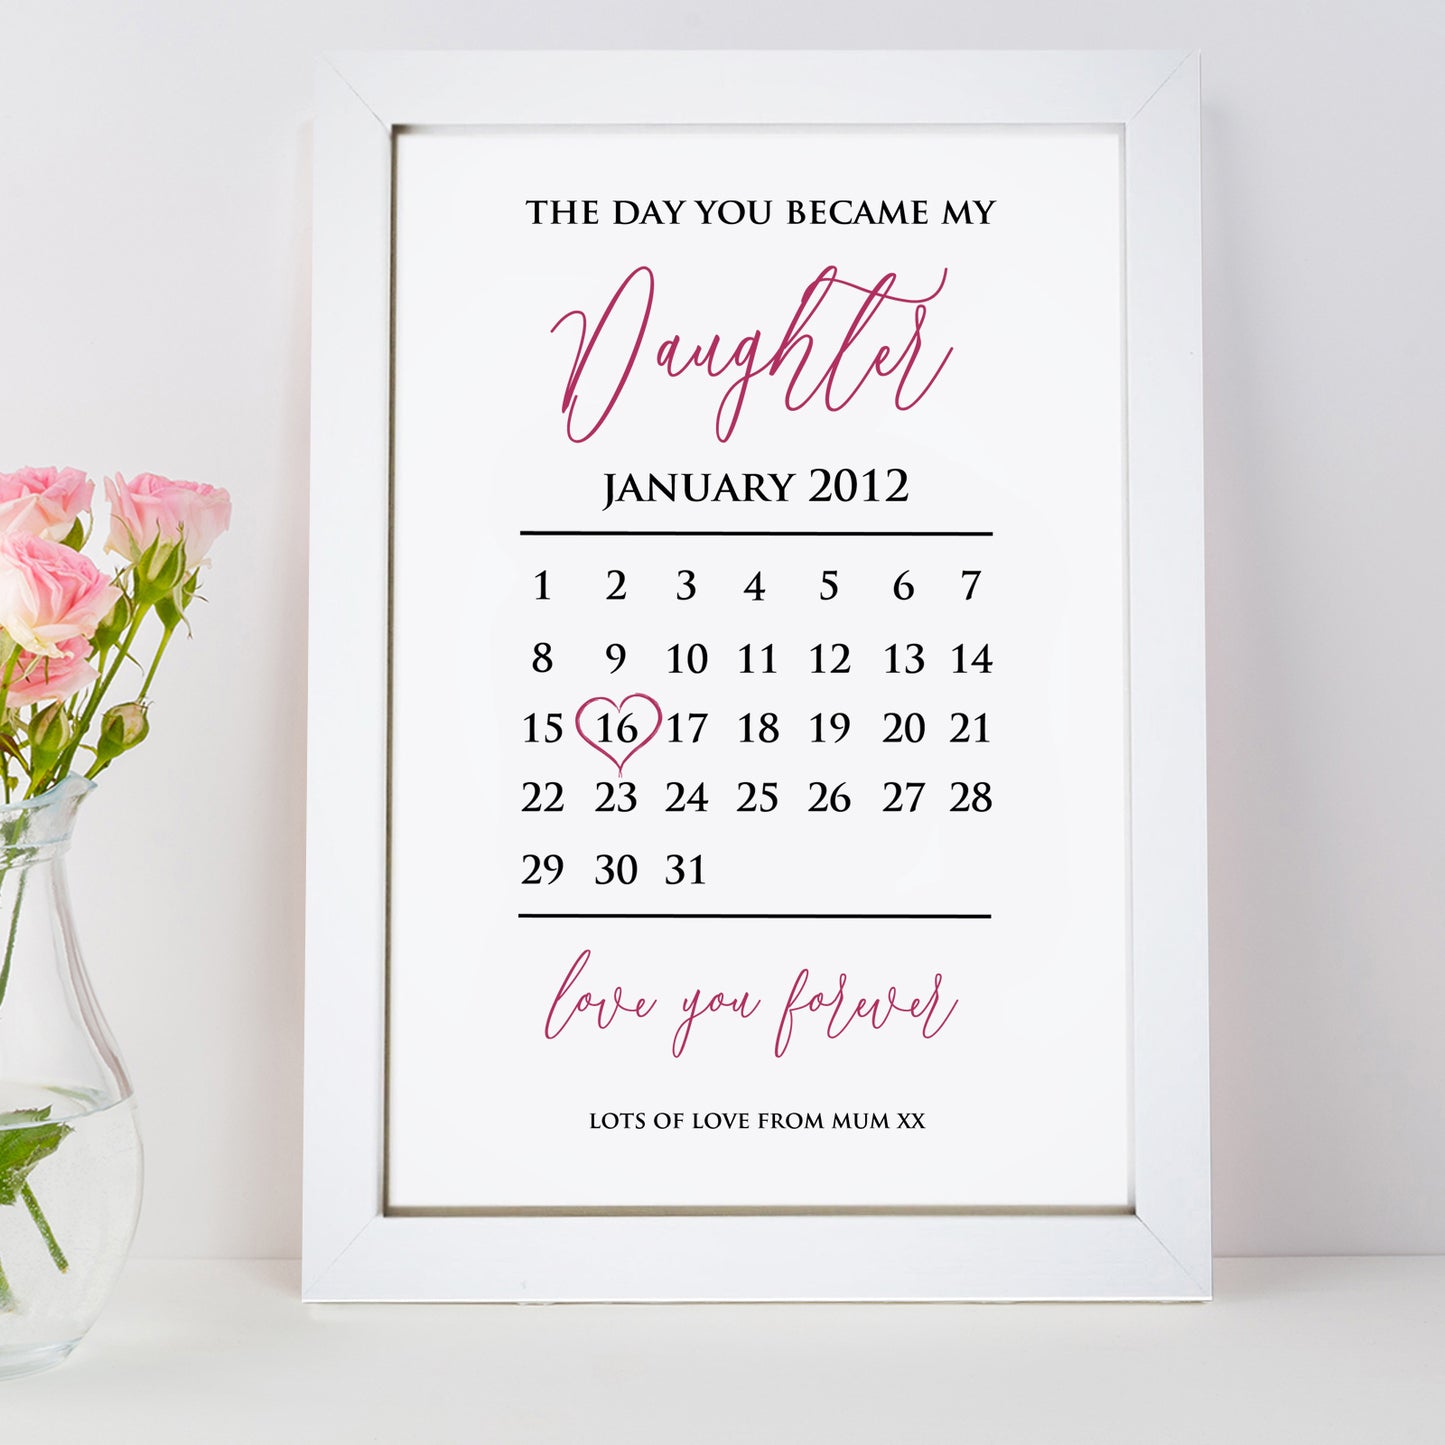 Personalised The Day You Became My Son/ Daughter Calendar Print